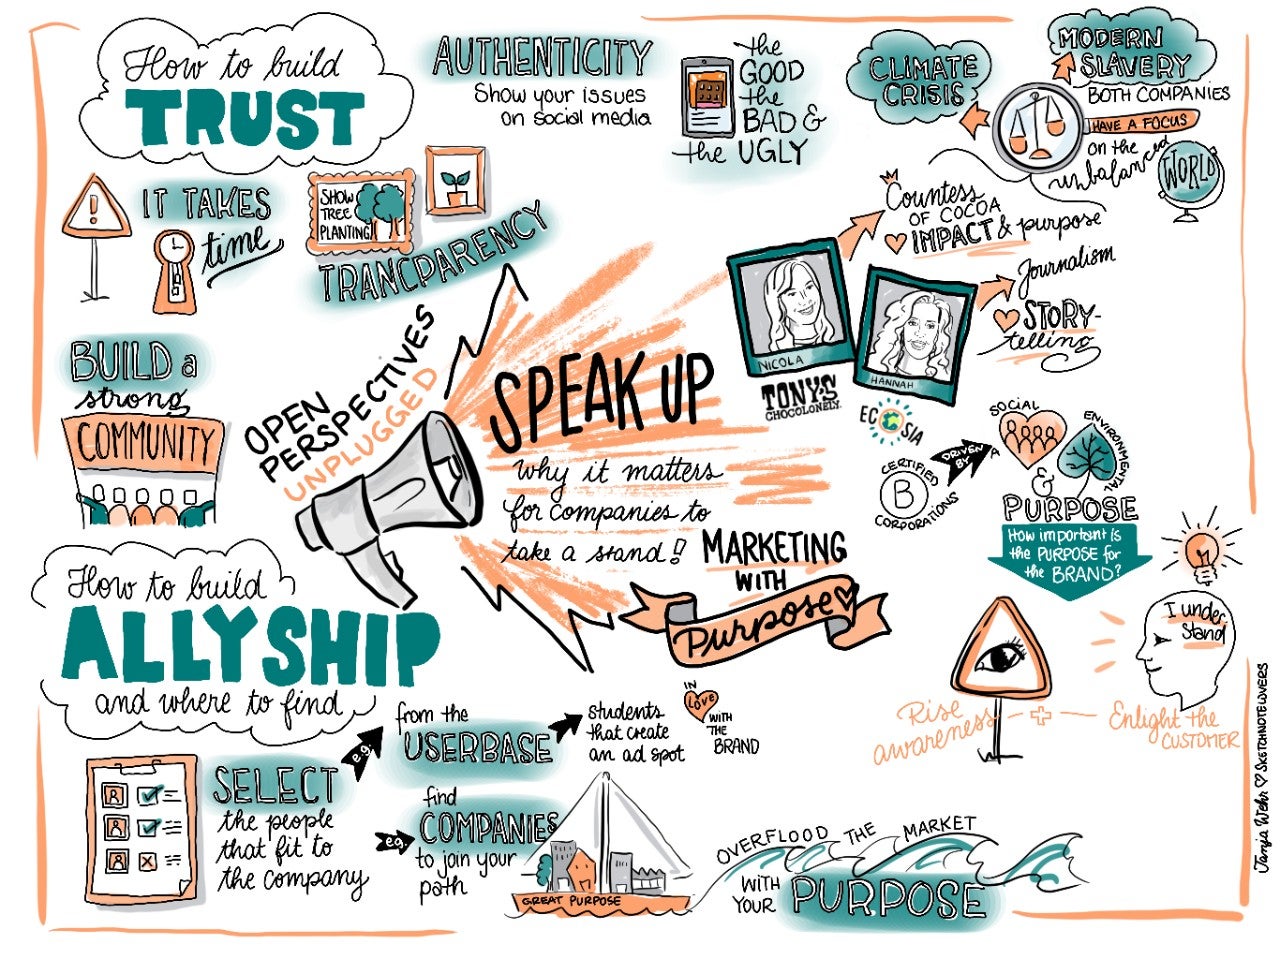 This the graphic recording from the introduction of the session. The image is  a visual summary of what is described in the above paragraph.